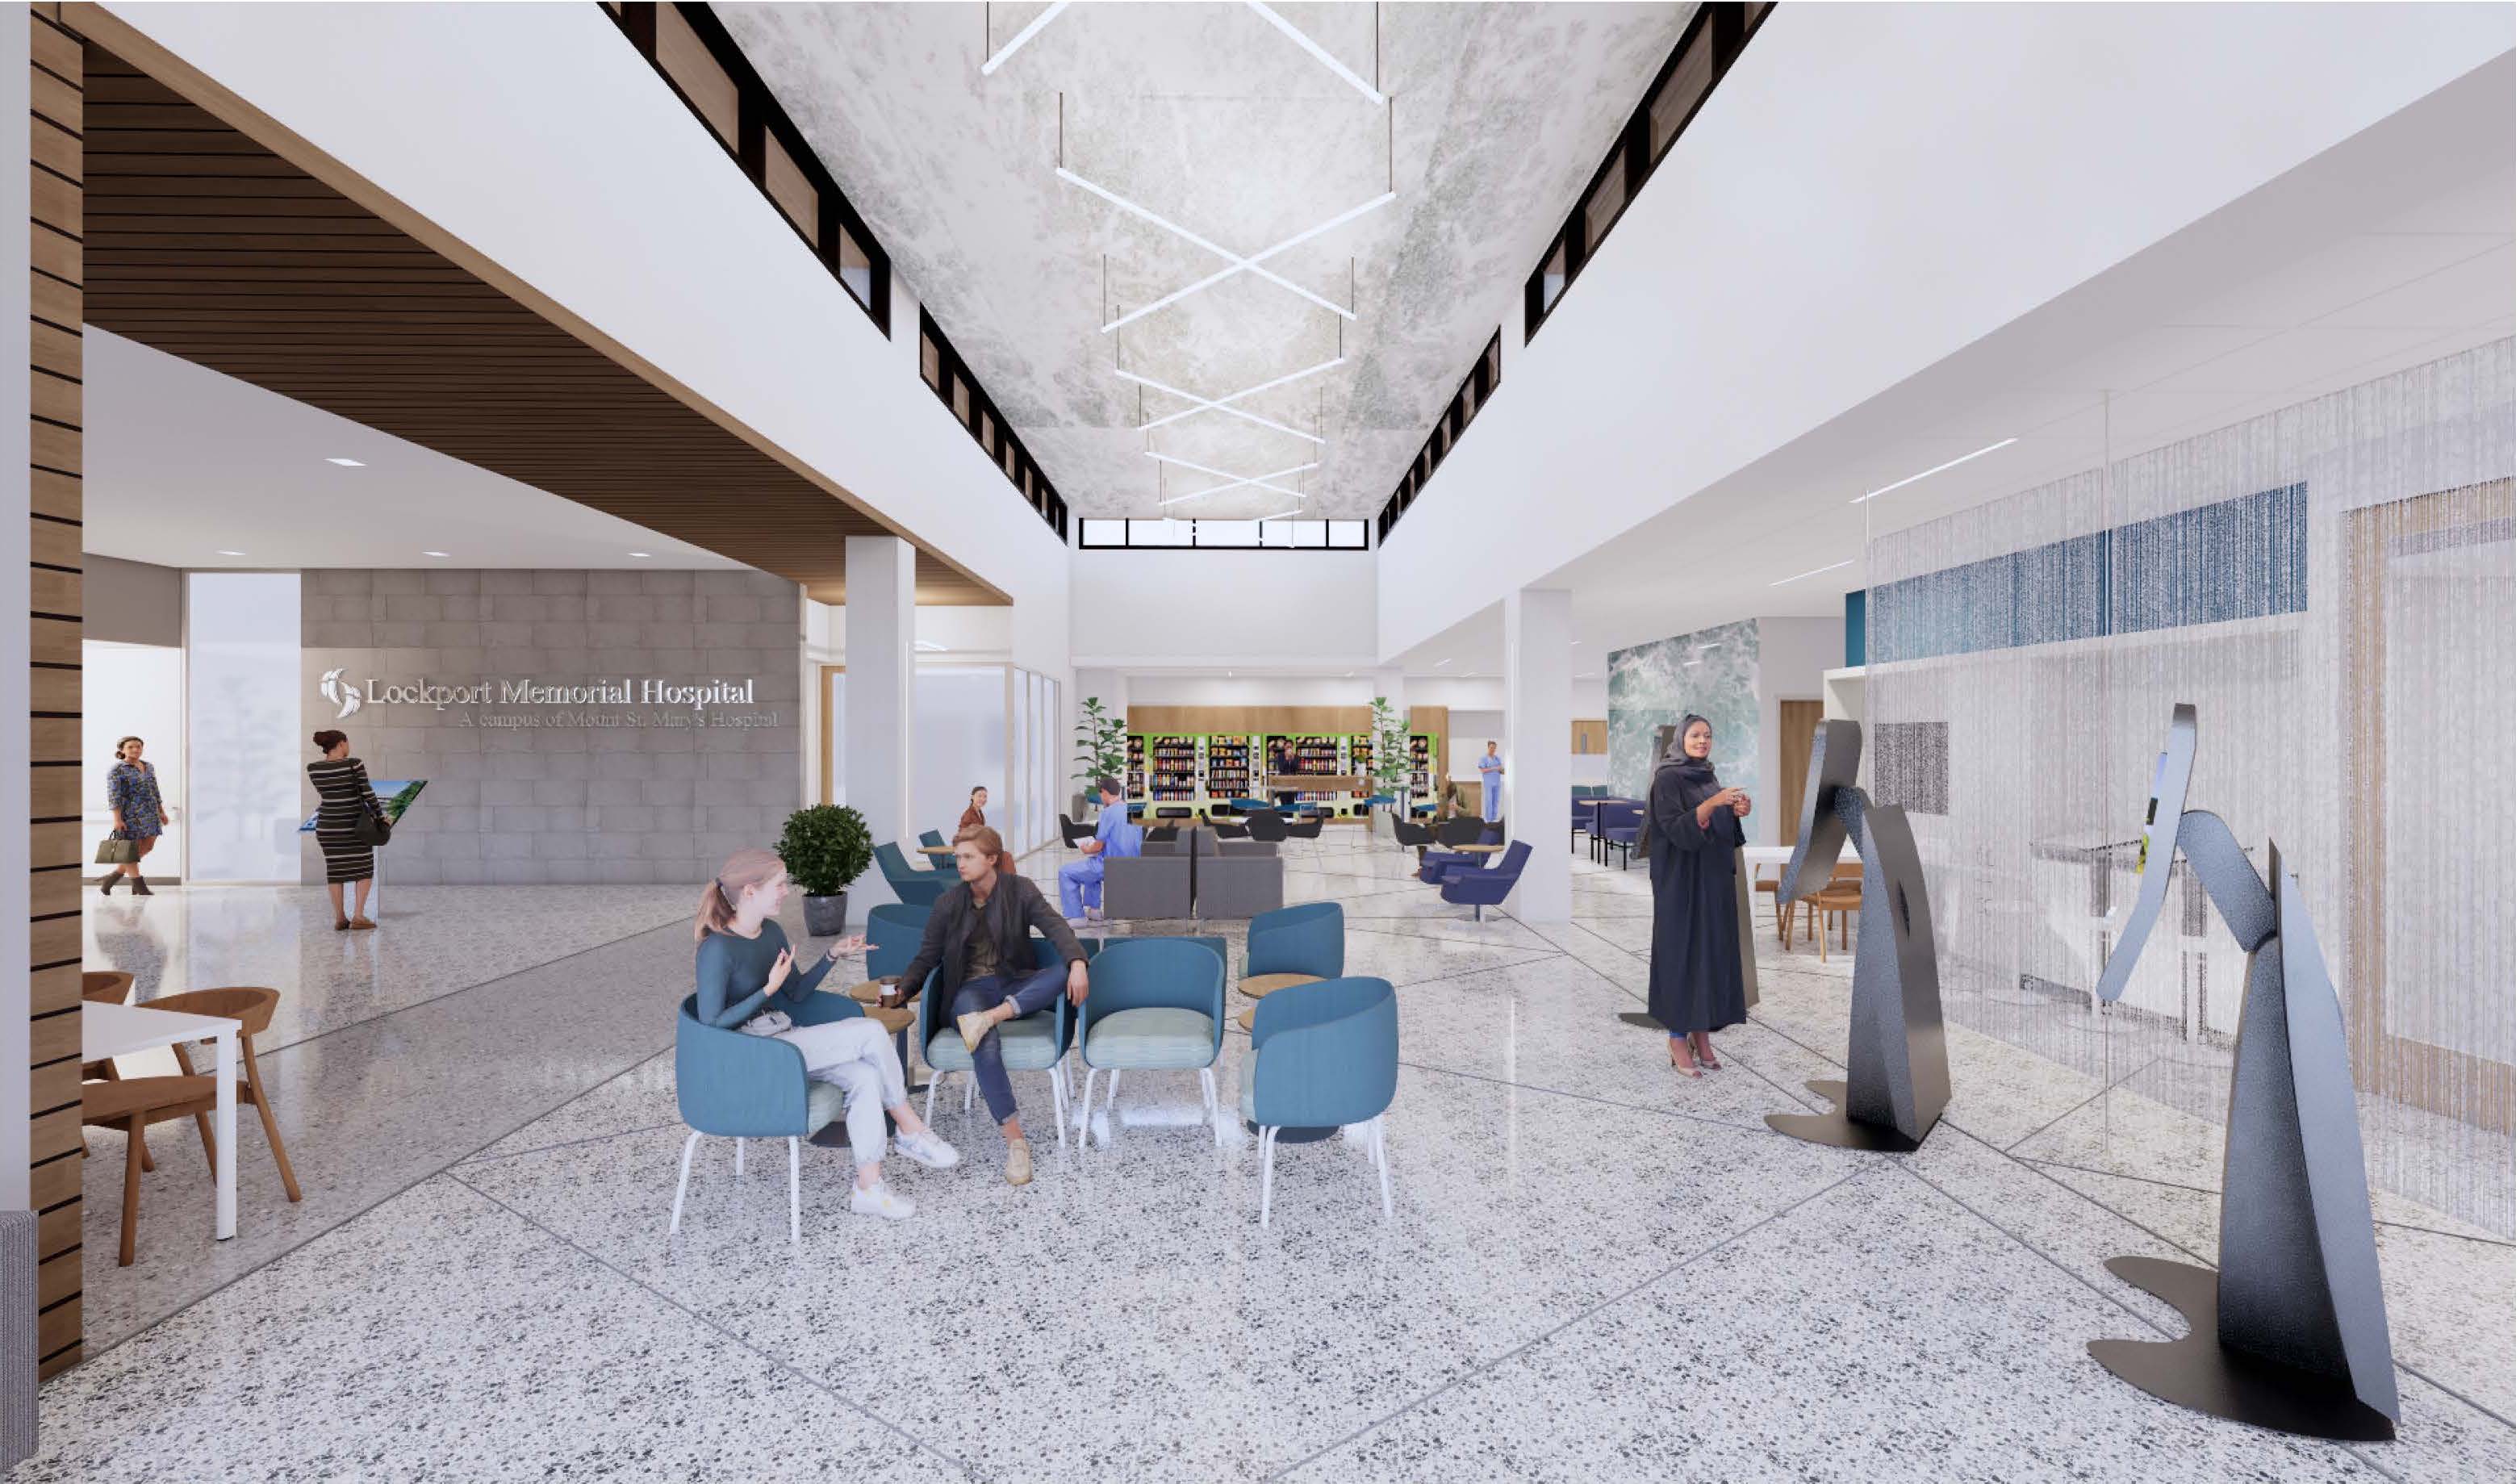 Renderings of the main lobby and emergency entrance of Lockport Memorial Hospital, a campus of Mount St. Mary's Hospital. (Courtesy of Catholic Health)